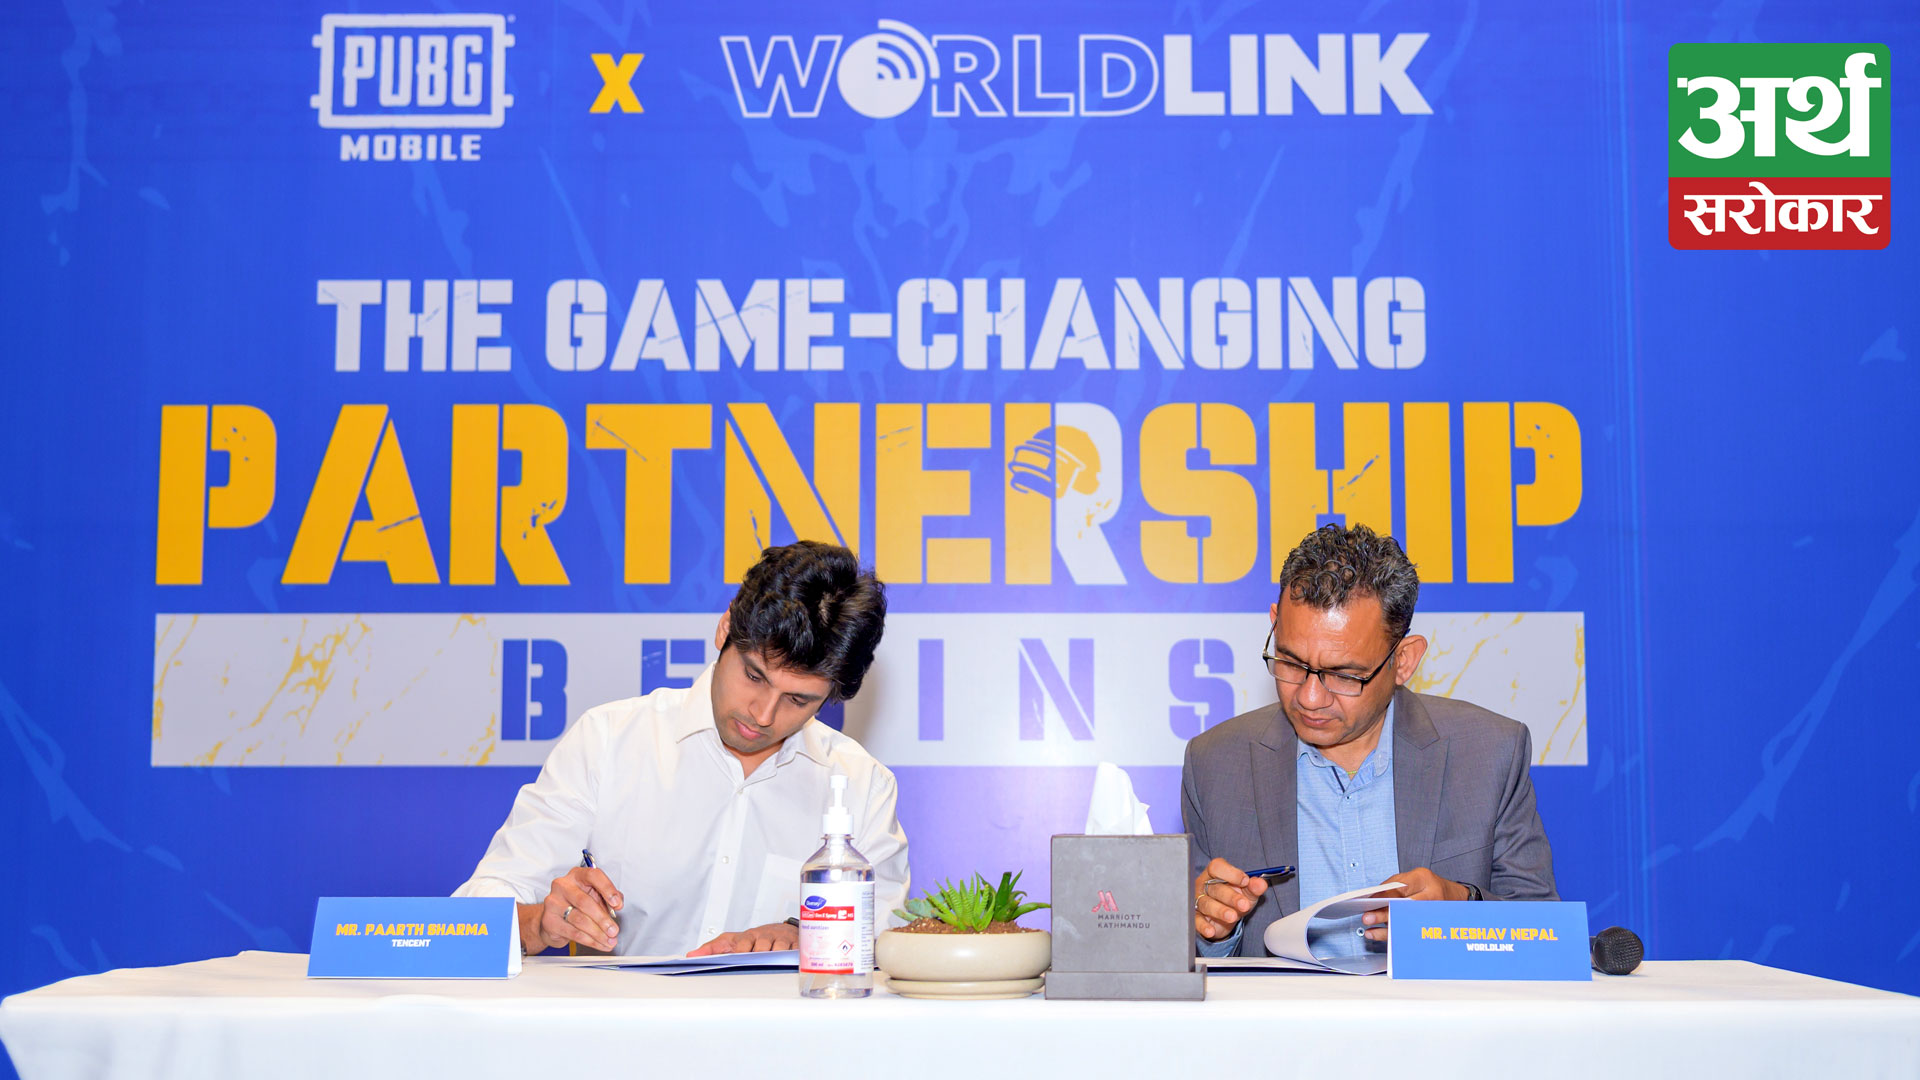 WorldLink Partnership with PUBG Mobile to bring a new level of gaming experience